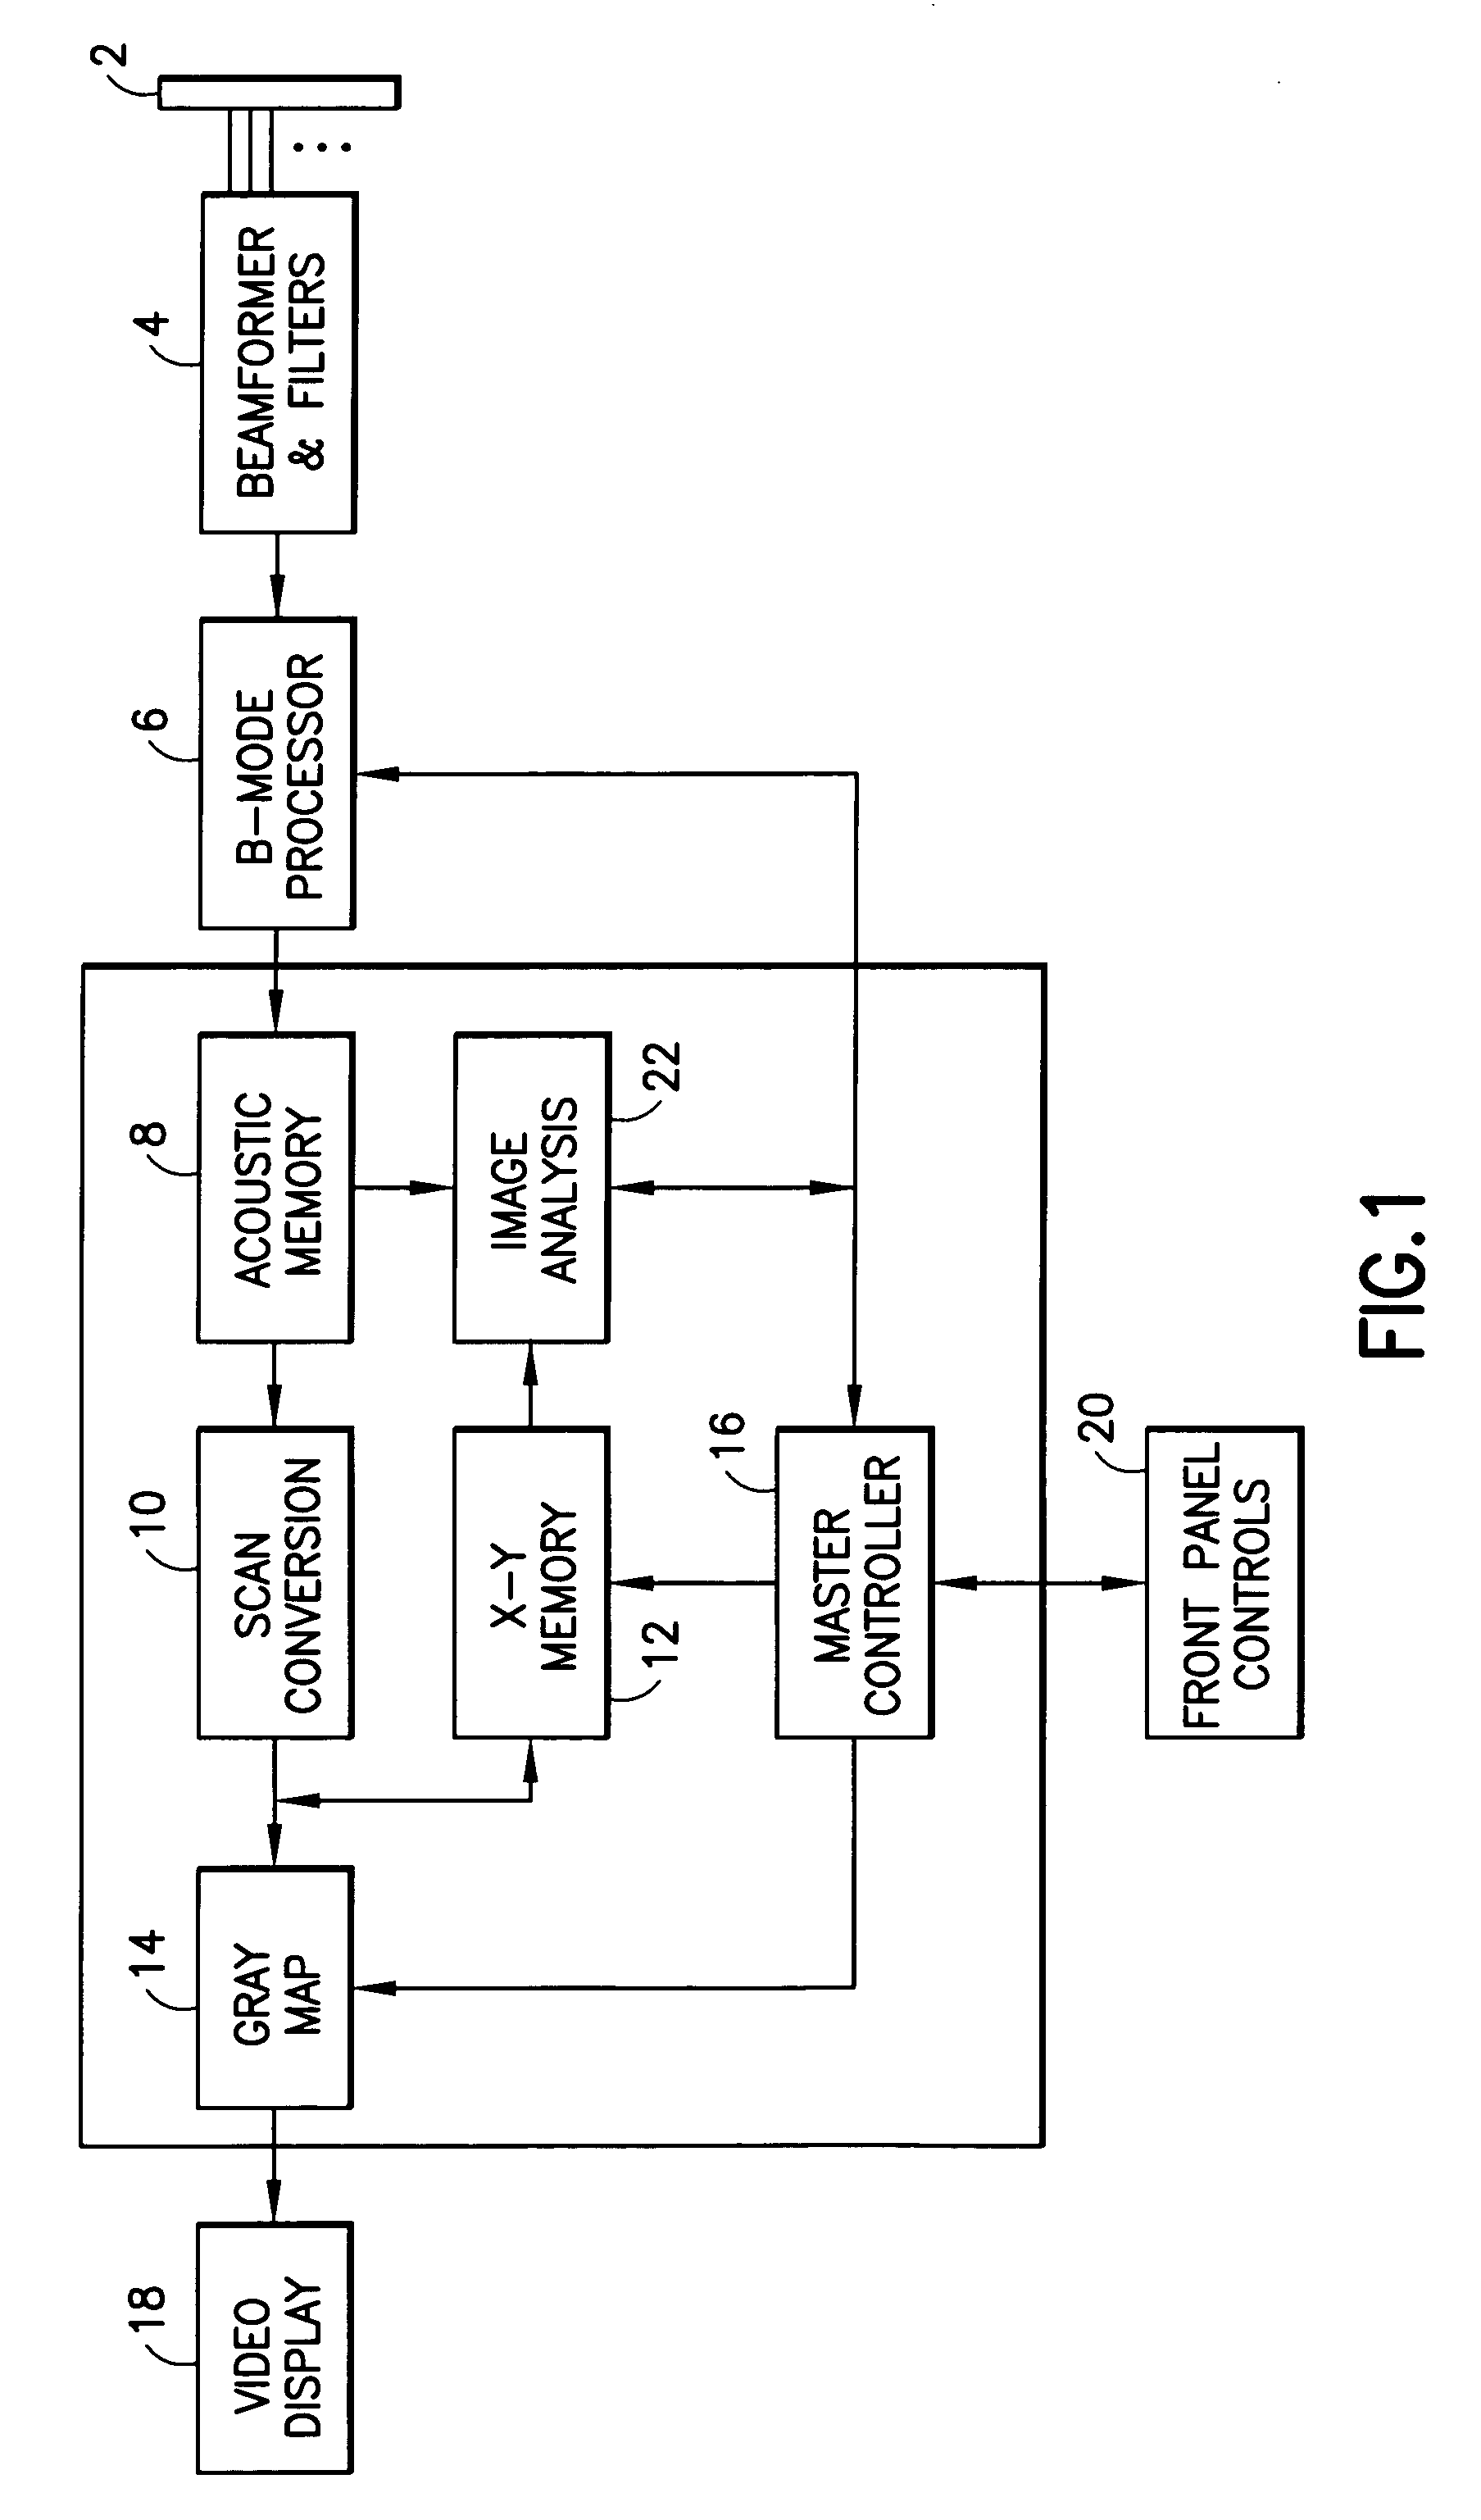 Imaging system having preset processing parameters adapted to user preferences